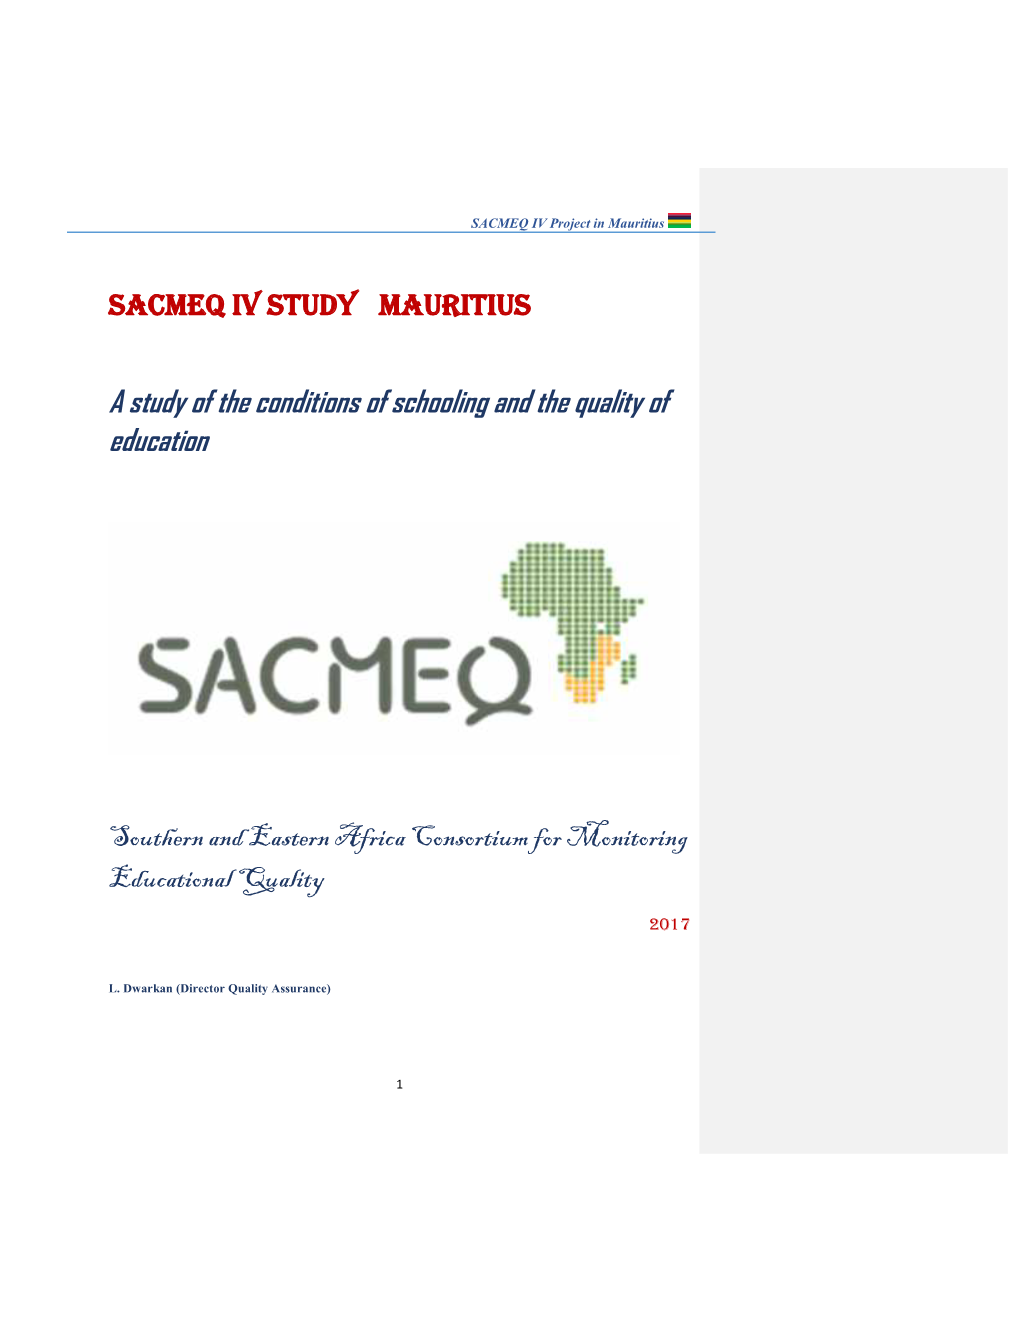 SACMEQ IV STUDY Mauritius a Study of the Conditions of Schooling and the Quality of Education